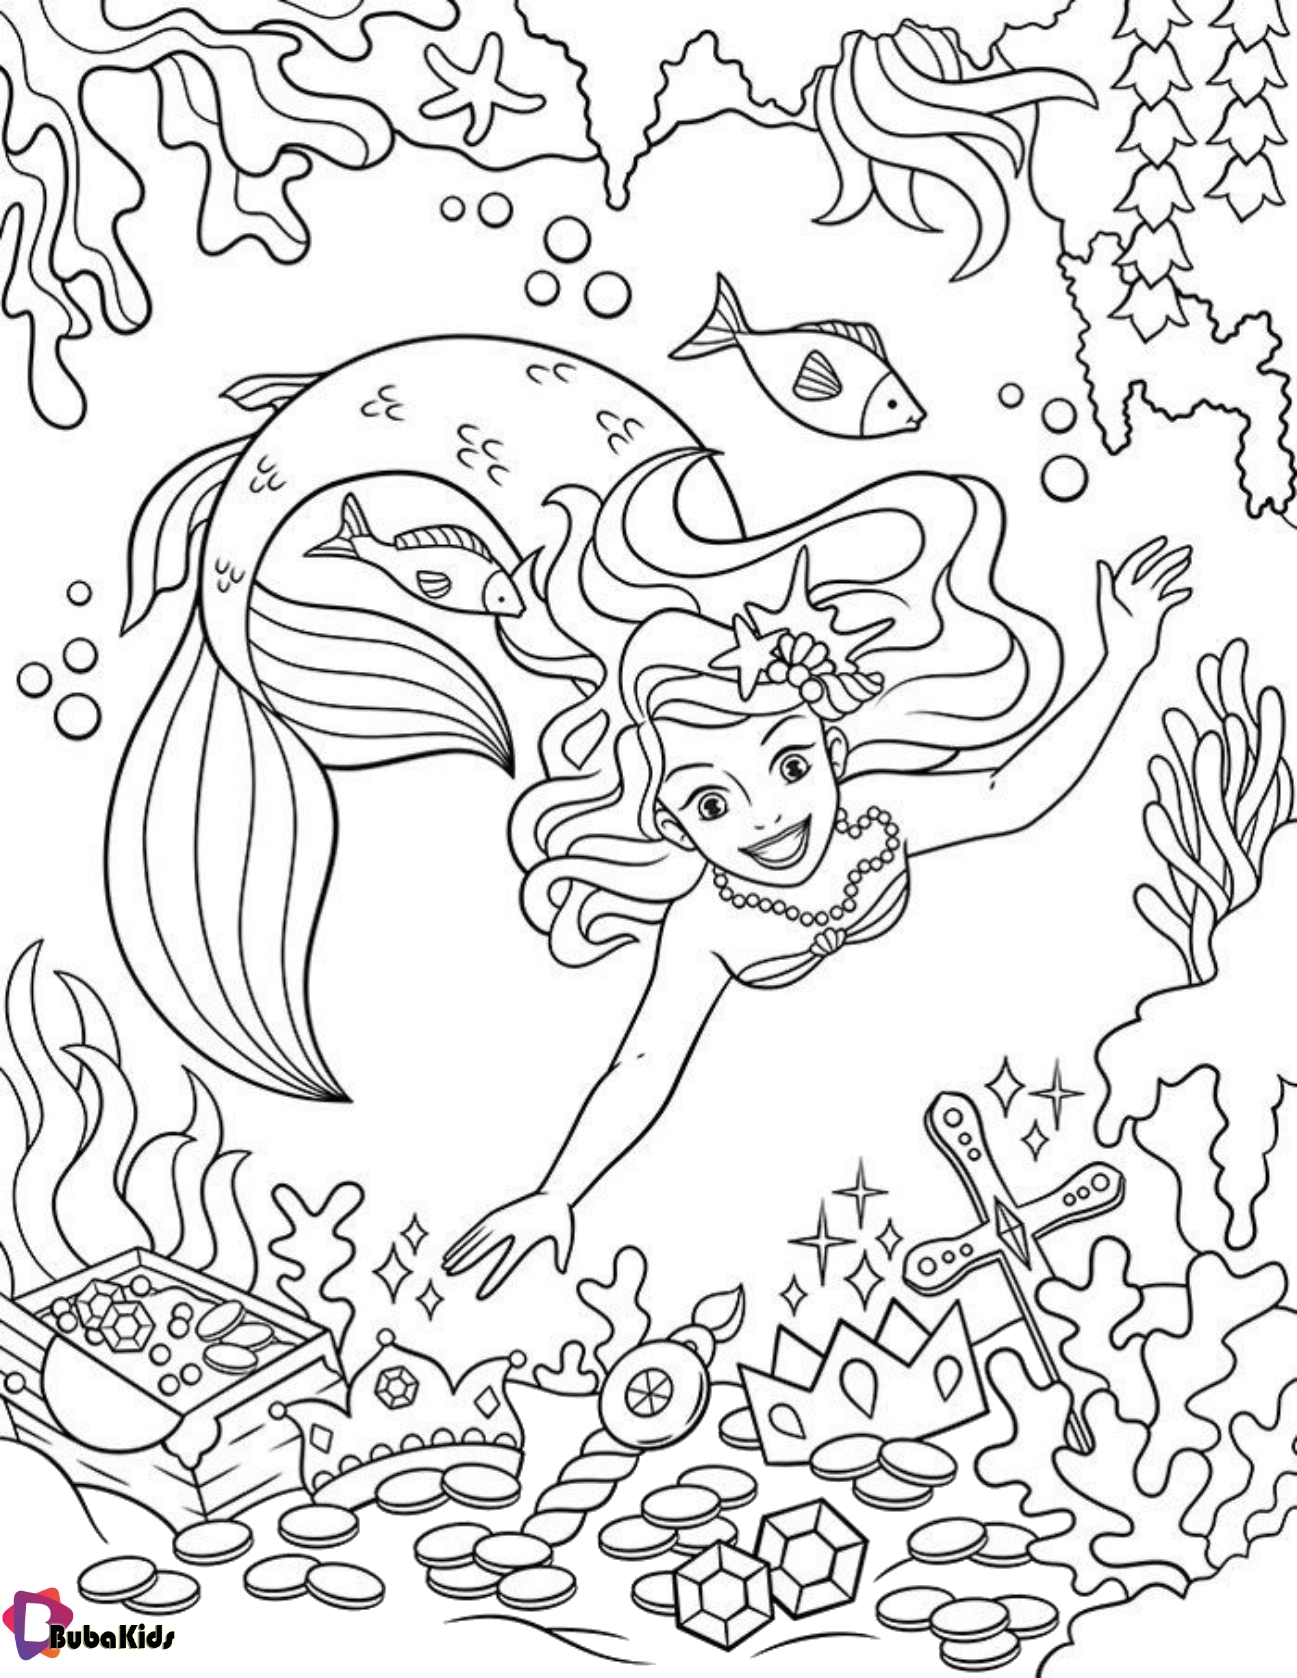 Free printable mermaids coloring pages for kids. Wallpaper